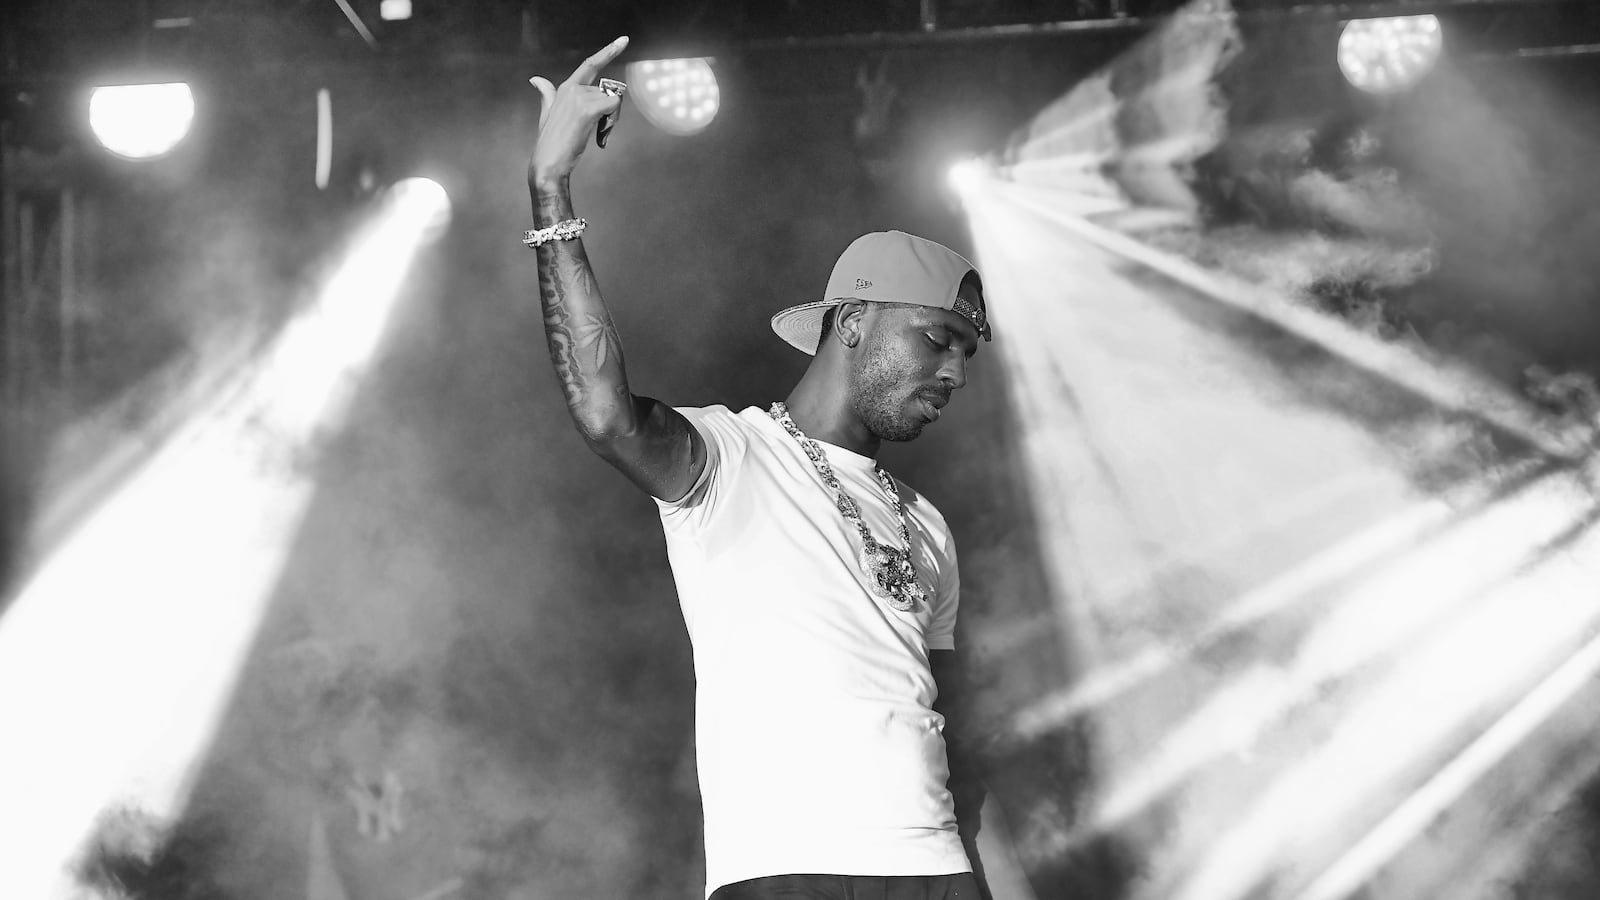 A black and white photograph of Memphis rapper Young Dolph gesturing on stage during a performance, pointing in the air as lights cascade across the background.